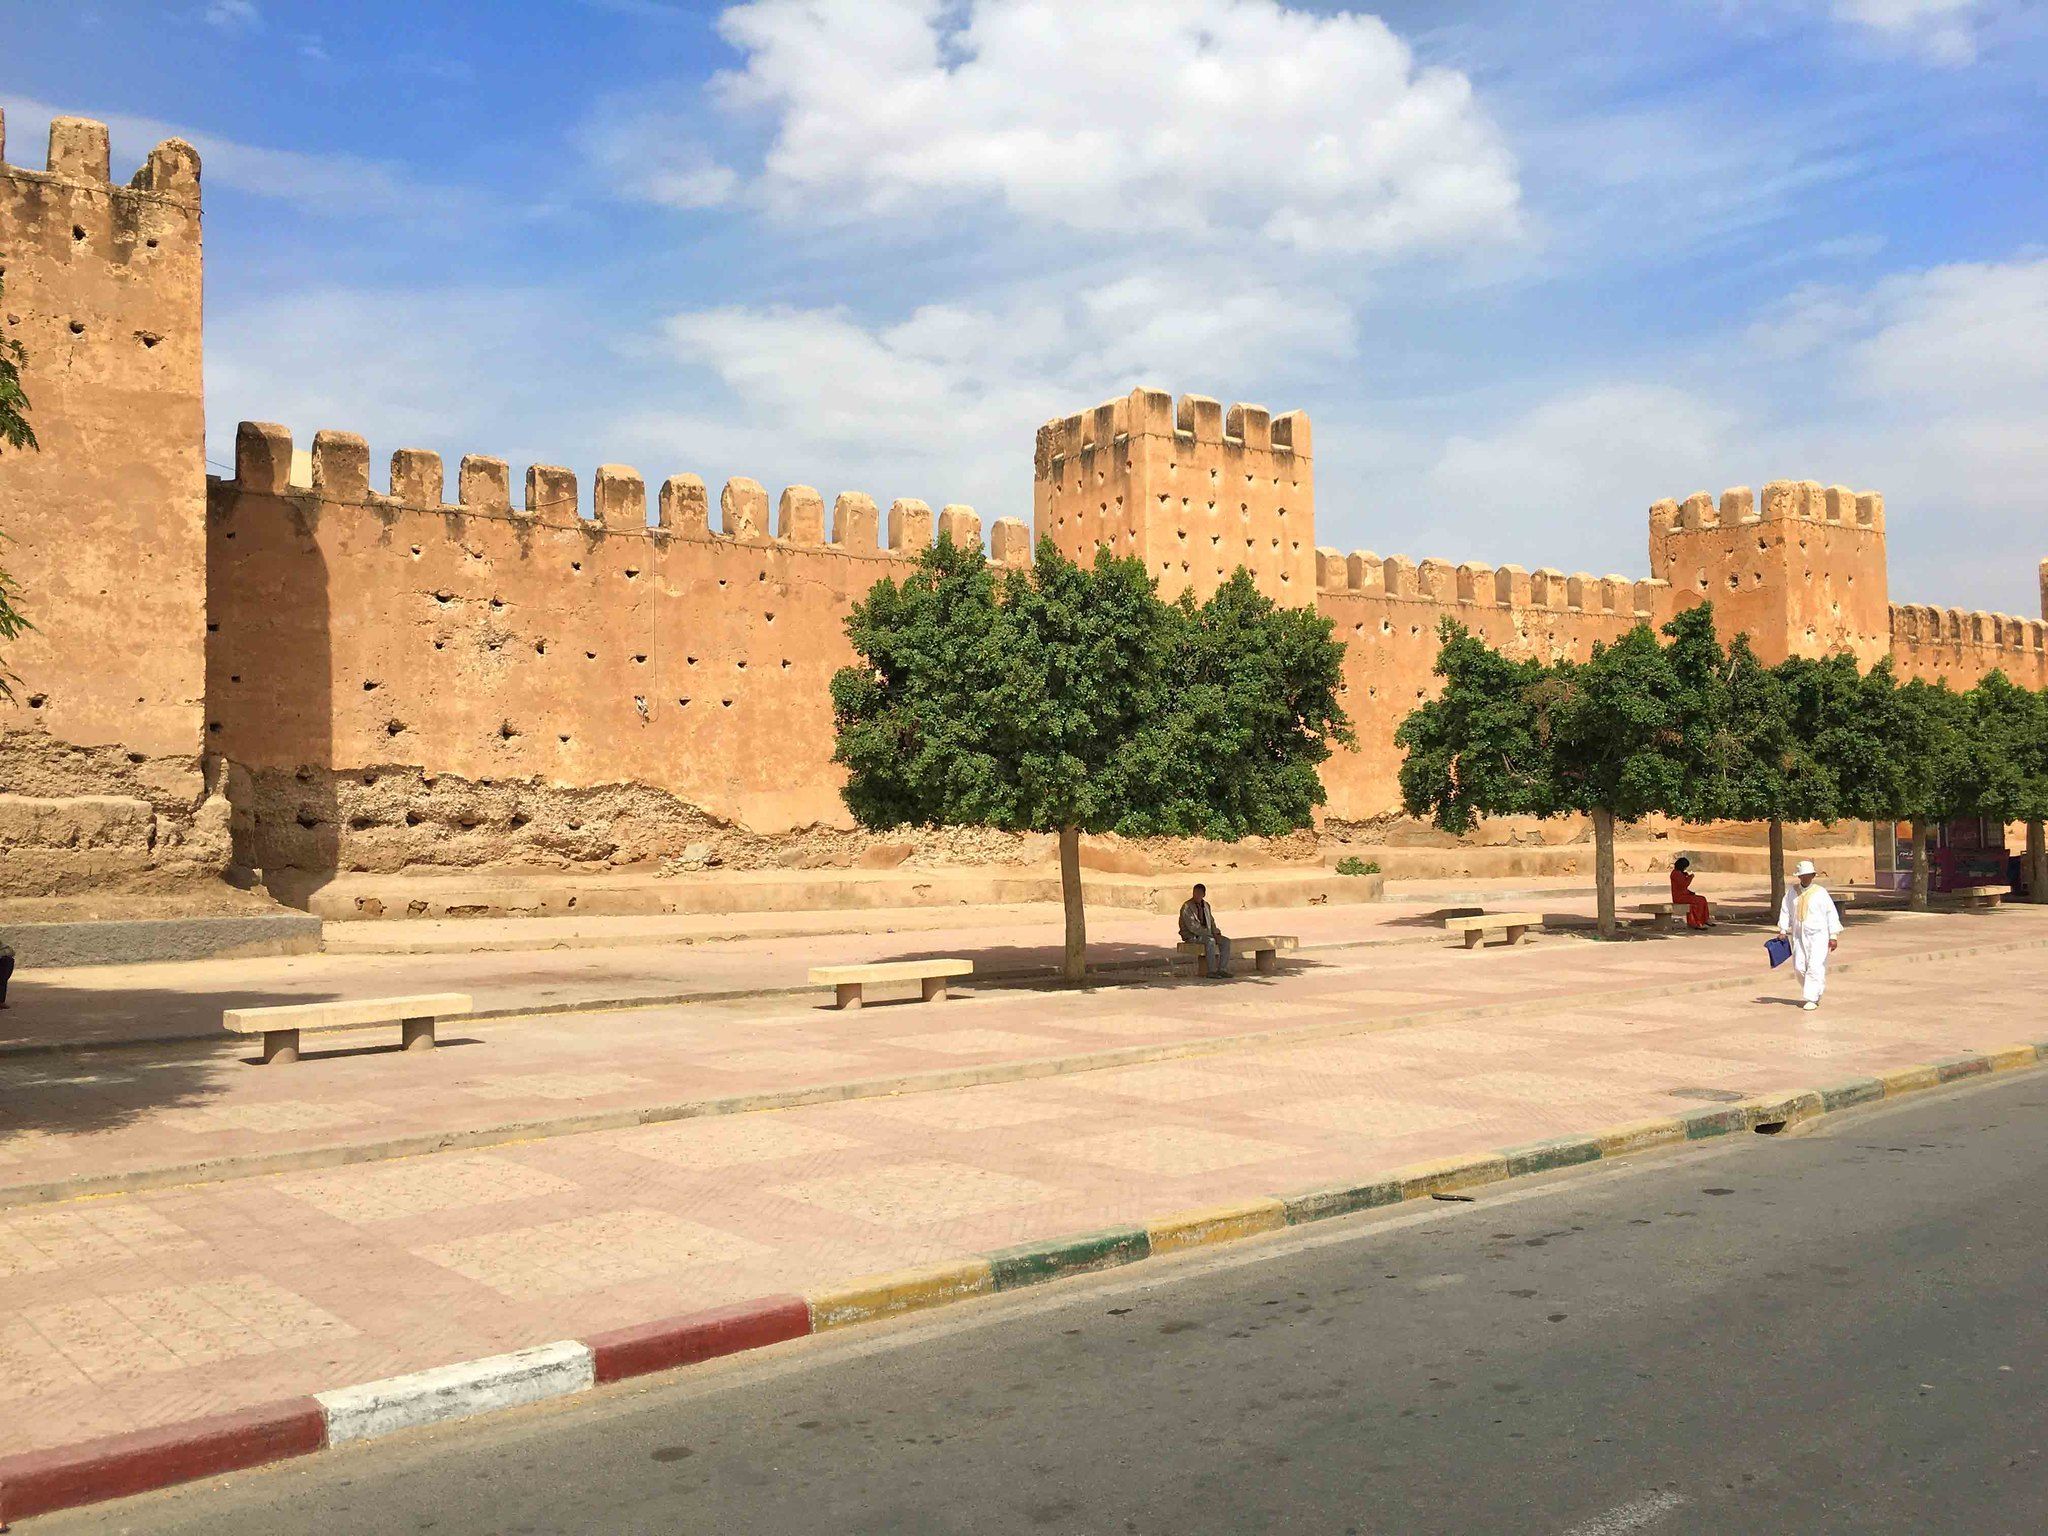 10 Amazing Cities to Visit in South Morocco and Why